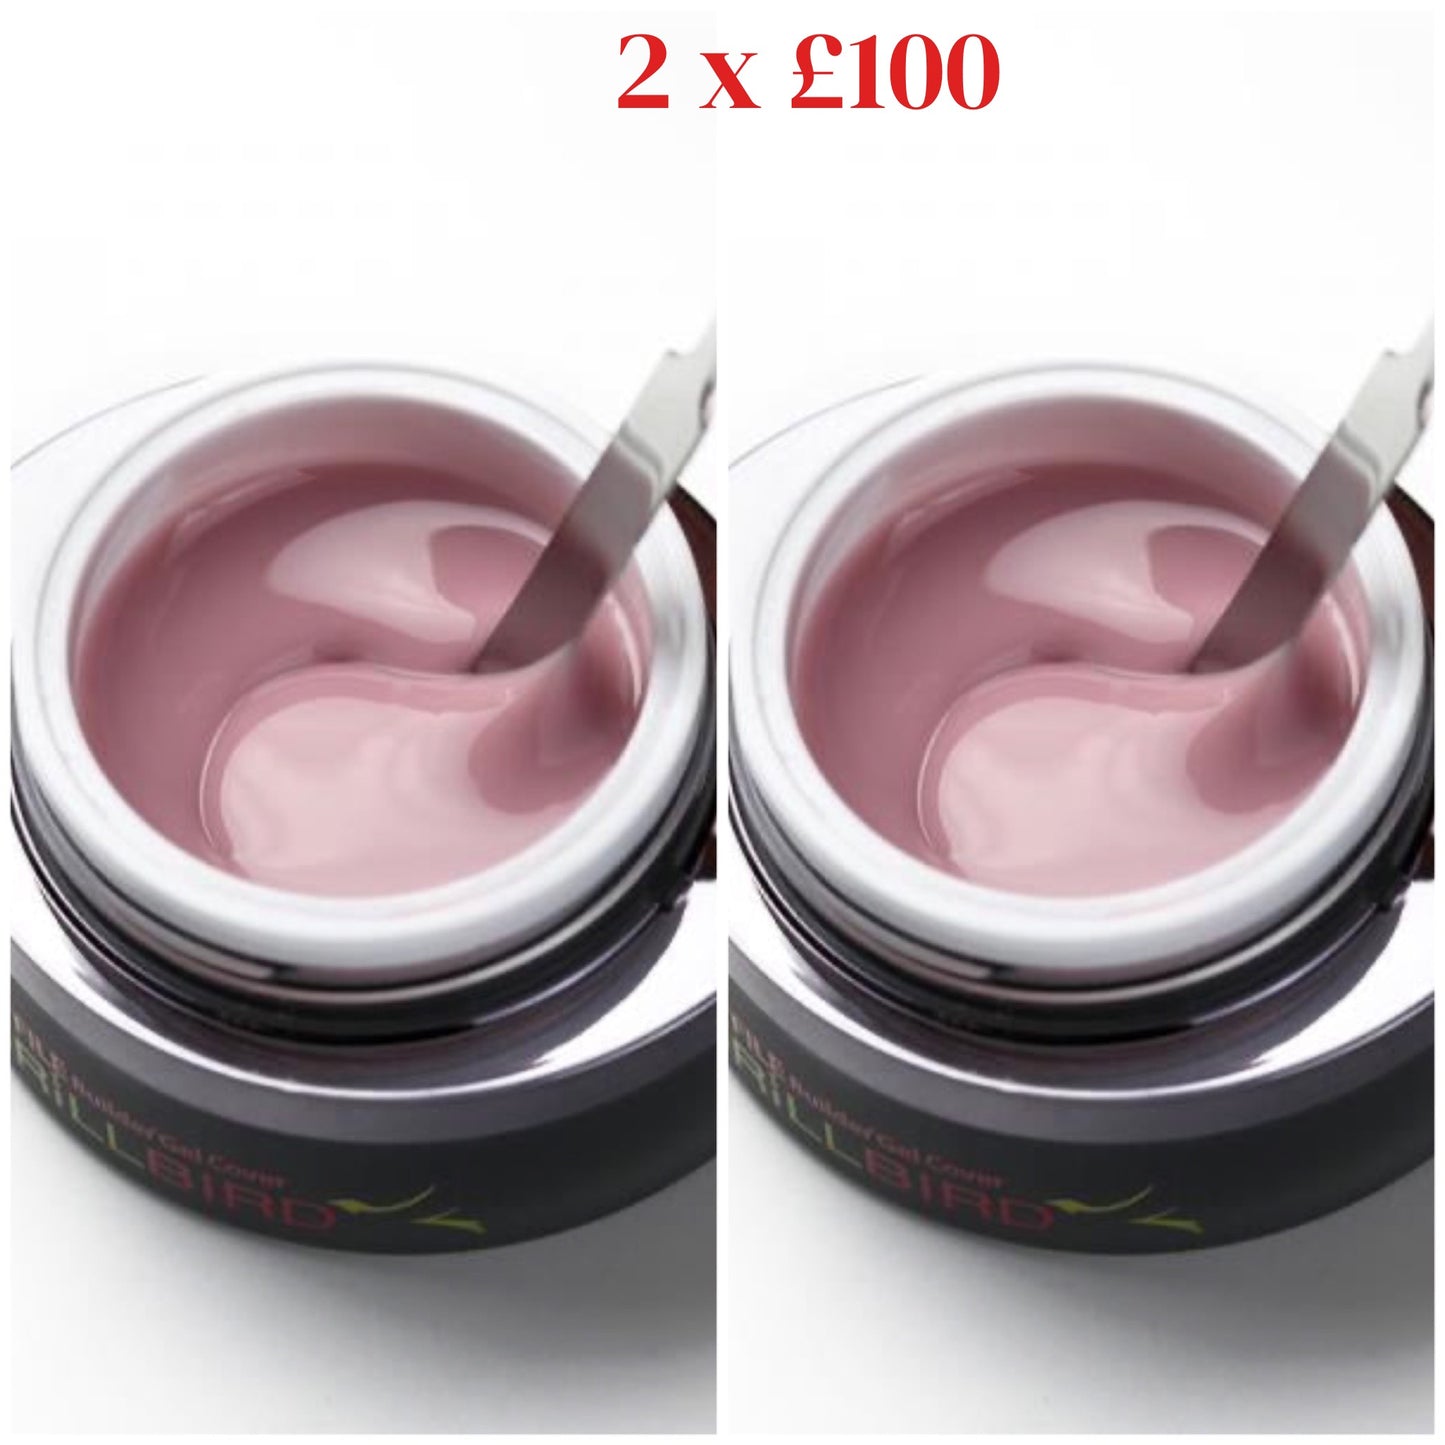 Easy no file 50ml duo (2 for £100)